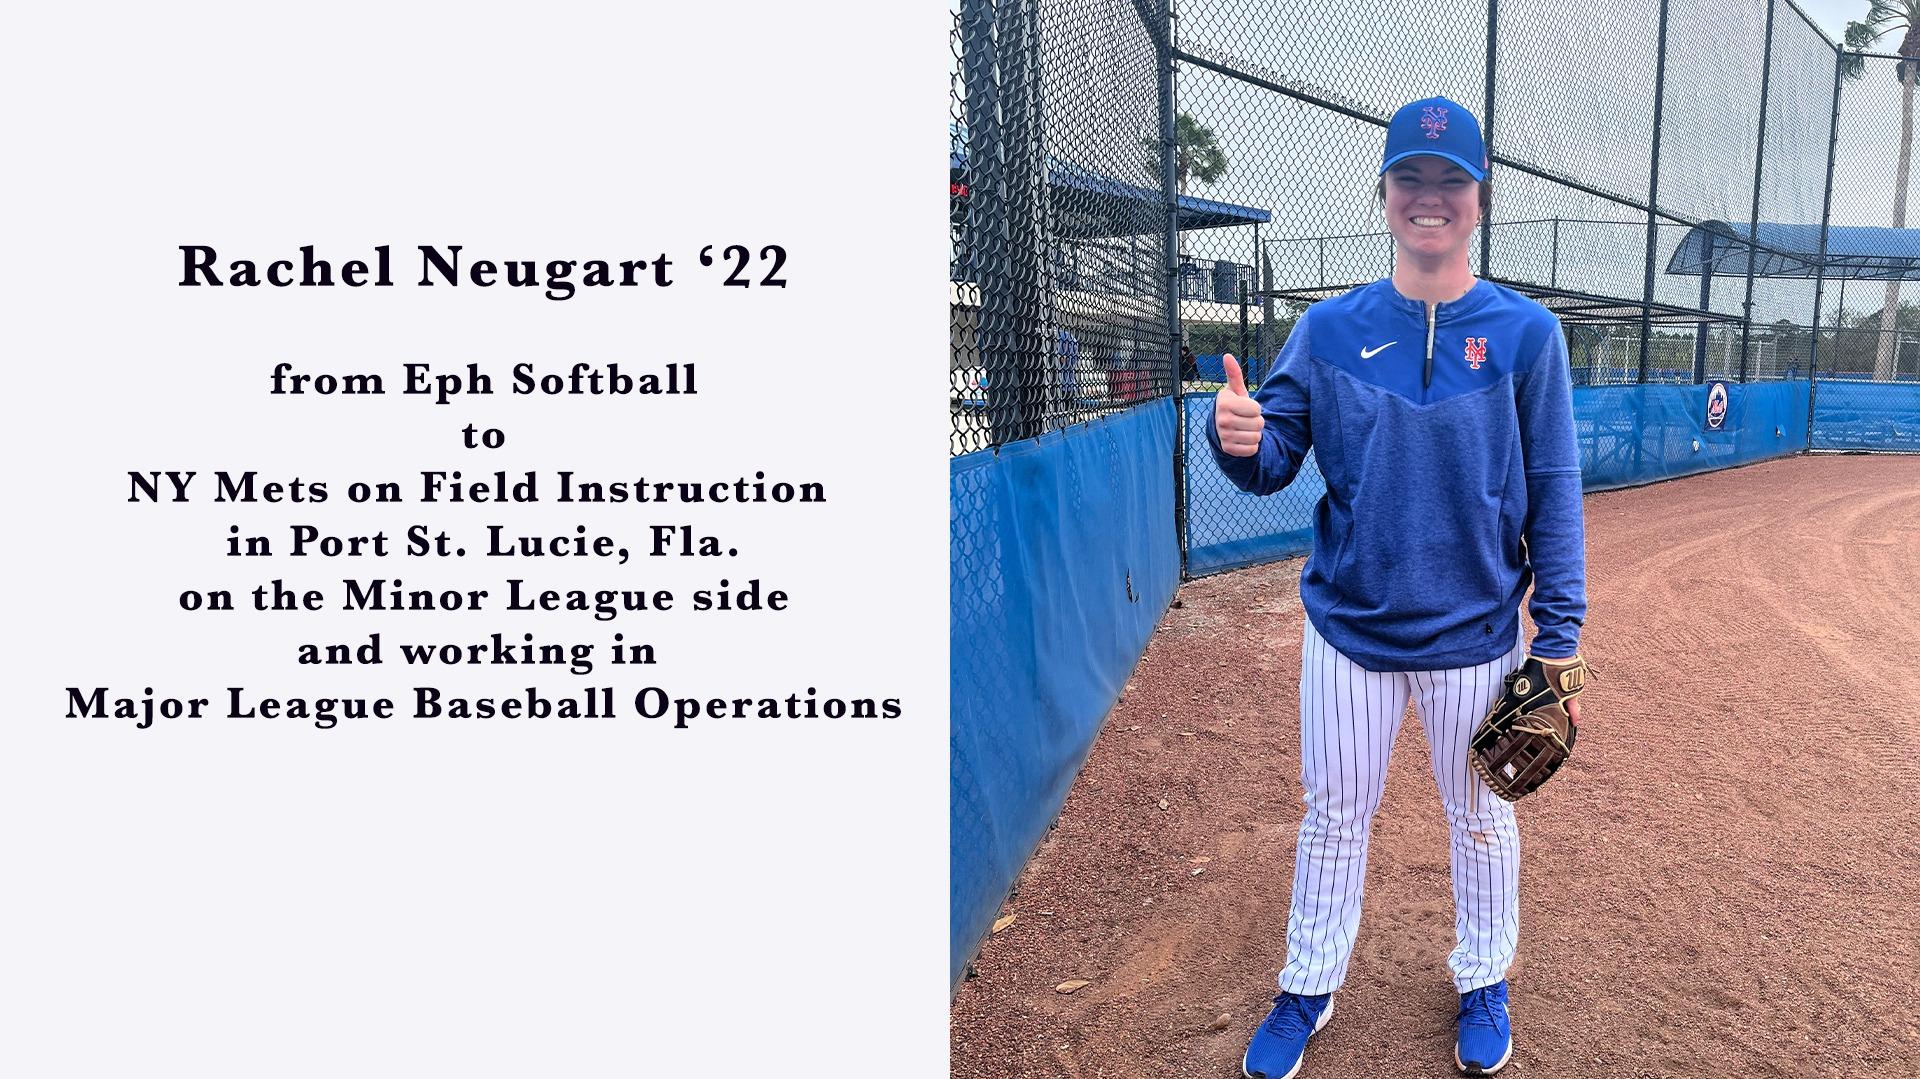 Rachel Neugart From Eph Softball To Working For The Ny Mets On